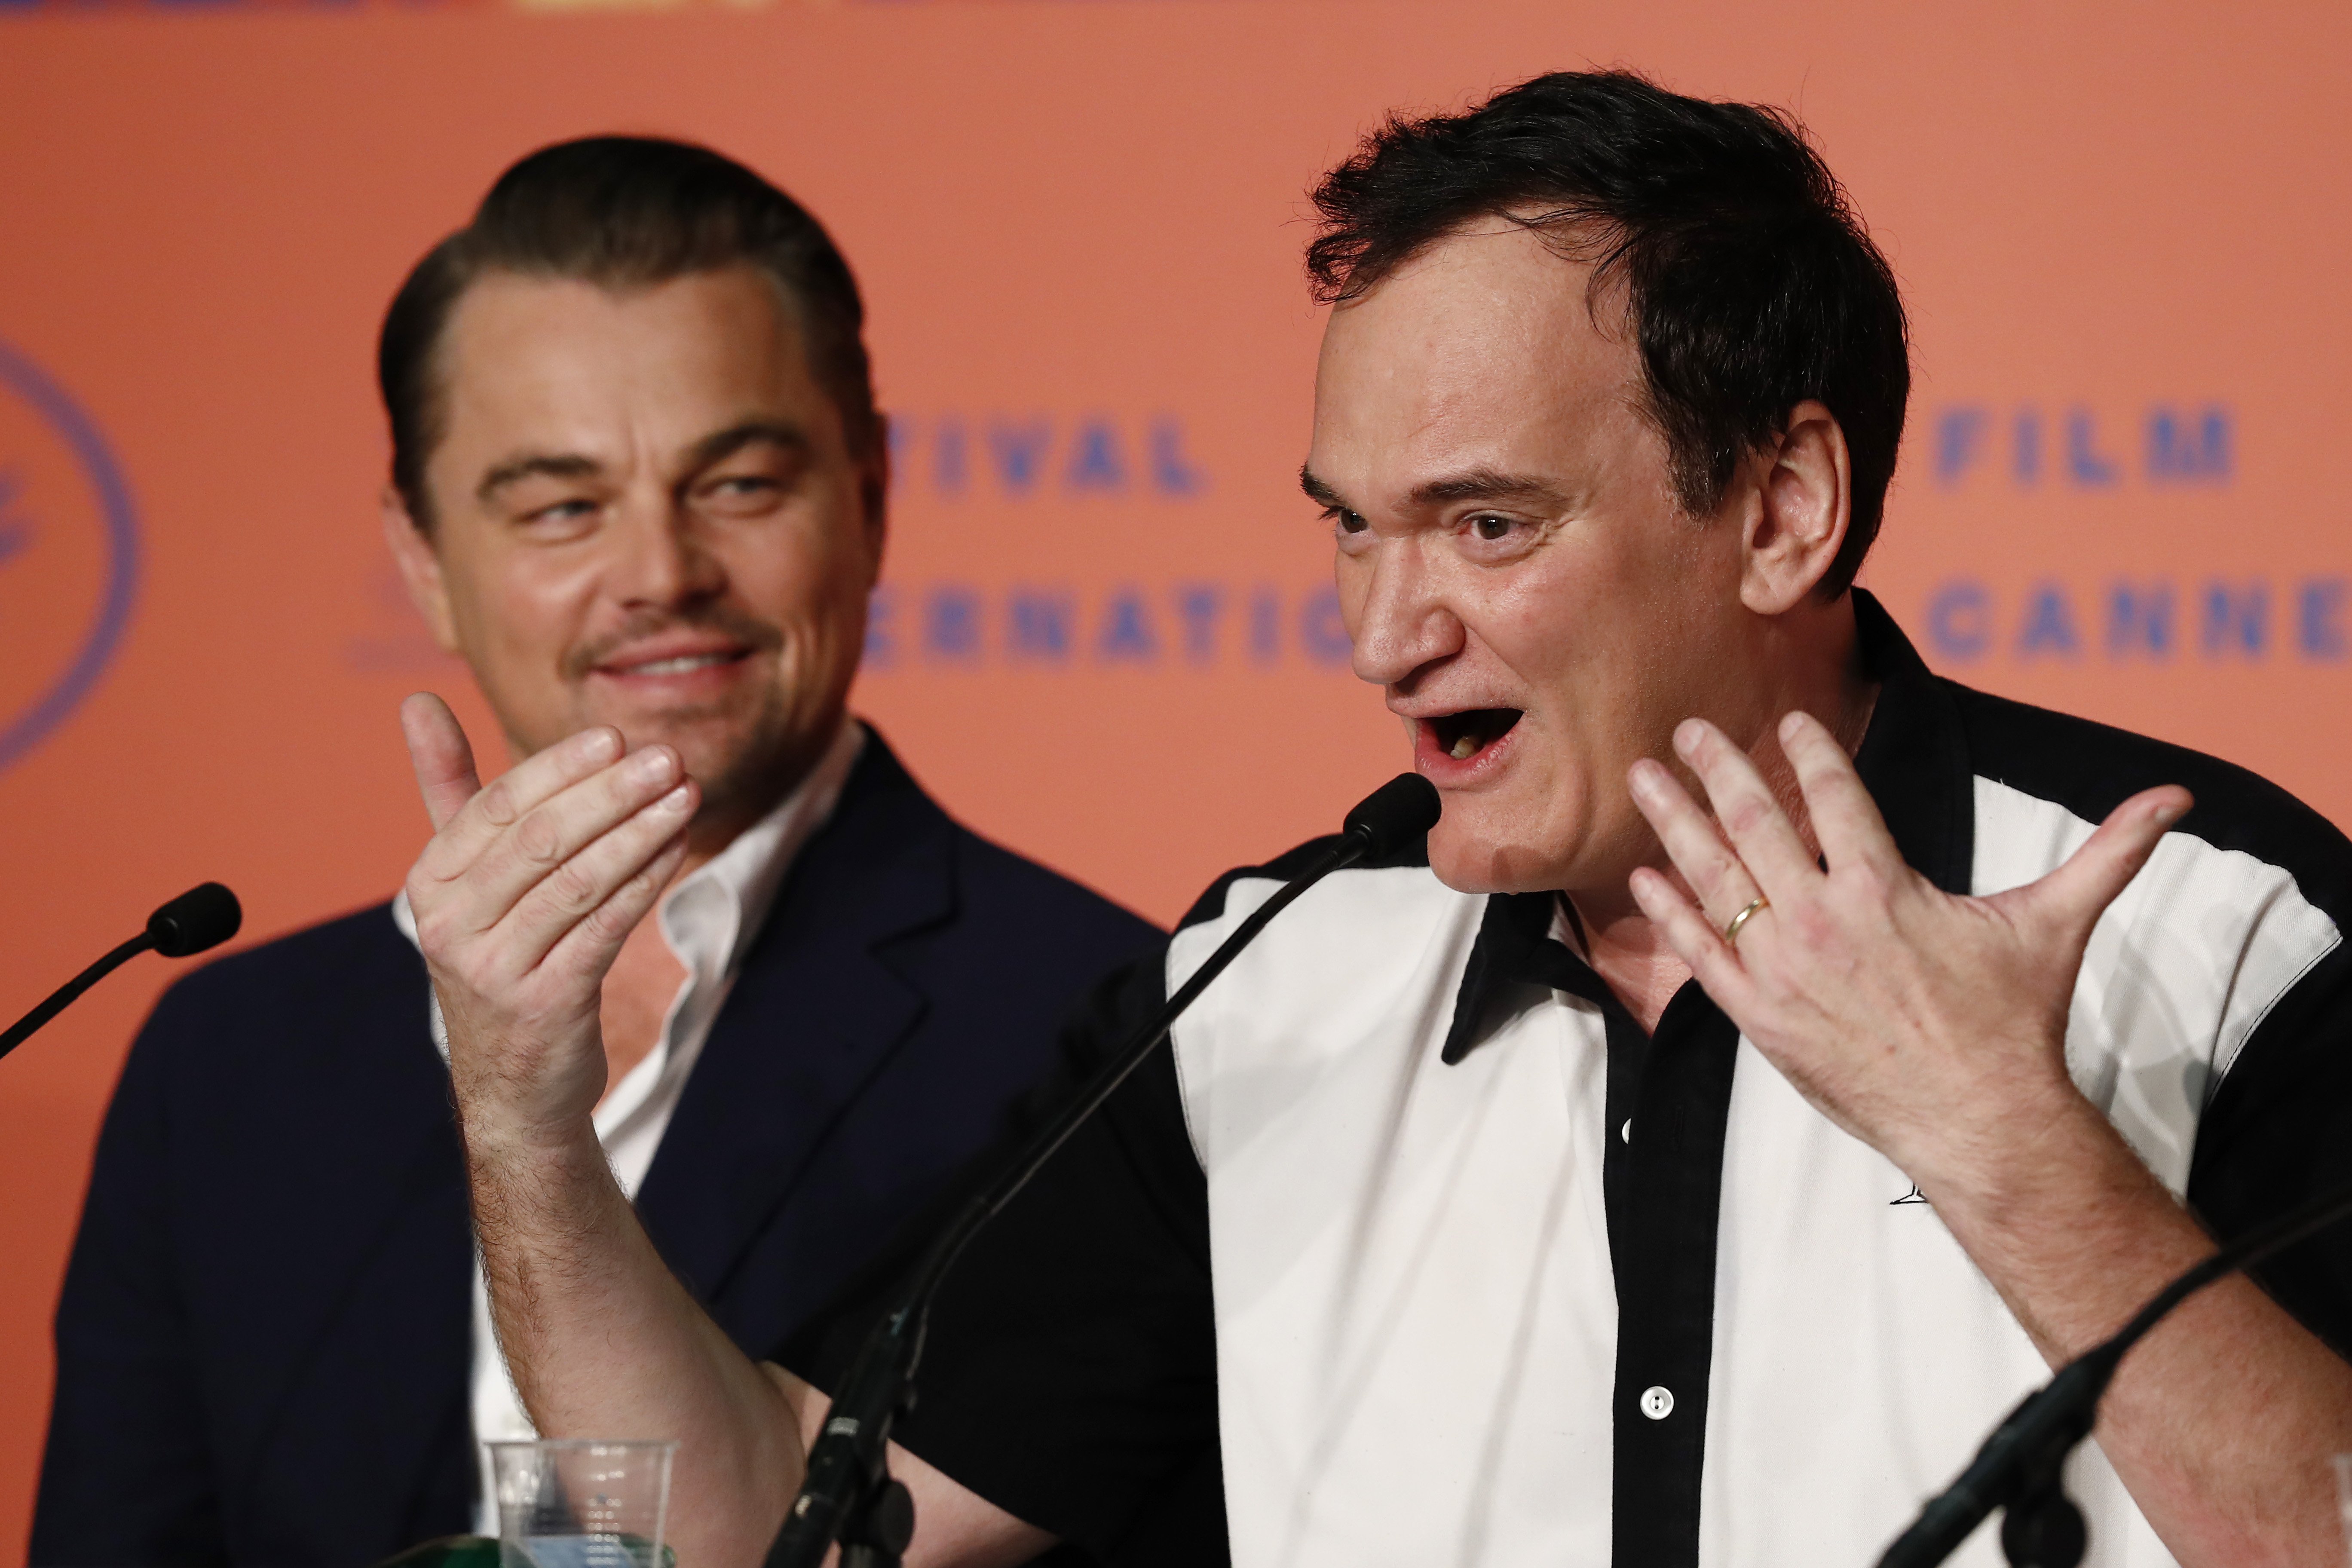 Leonardo DiCaprio and Director Quentin Tarantino attend the "Once Upon A Time In Hollywood" Press Conference during the 72nd annual Cannes Film Festival on May 22, 2019 | Photo: GettyImages